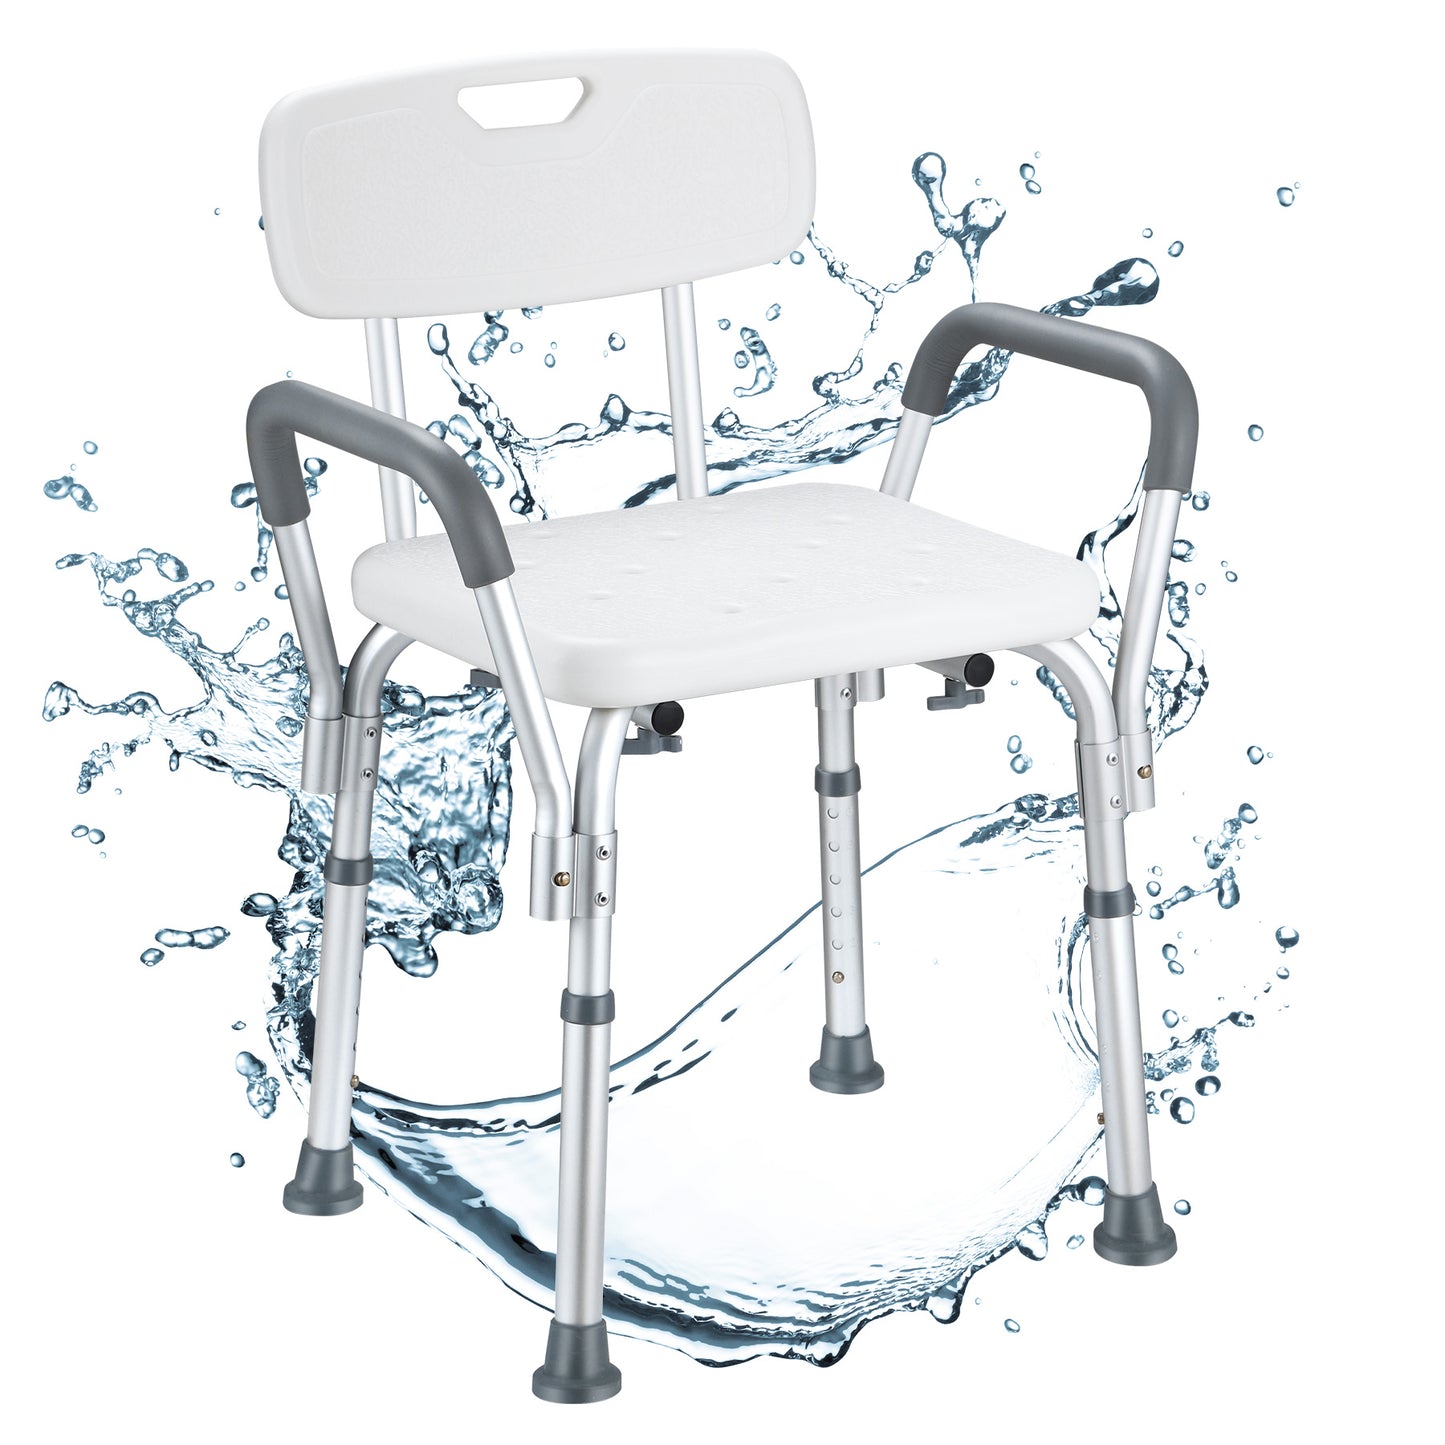 Height Adjustable Shower Chair with Detachable Armrests Backrest, Bath Chair for Seniors, Pregnant Women, Disabled